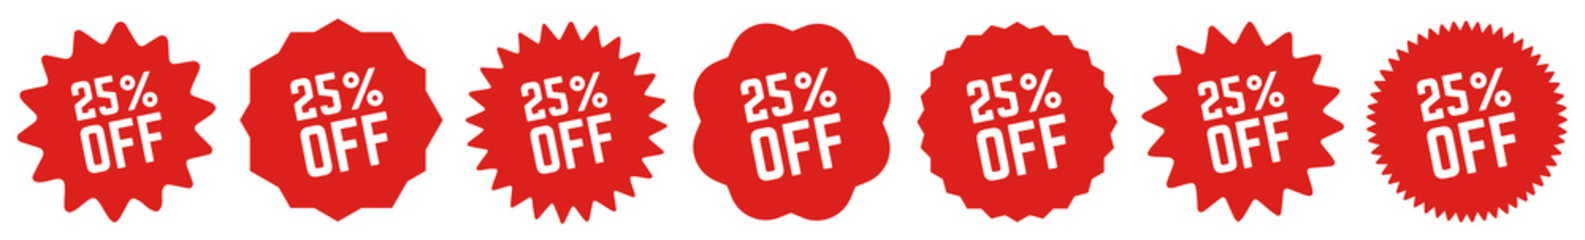 25 Percent OFF Discount Tag Red | Special Offer Icon | Sale Sticker | Deal Label | Variations